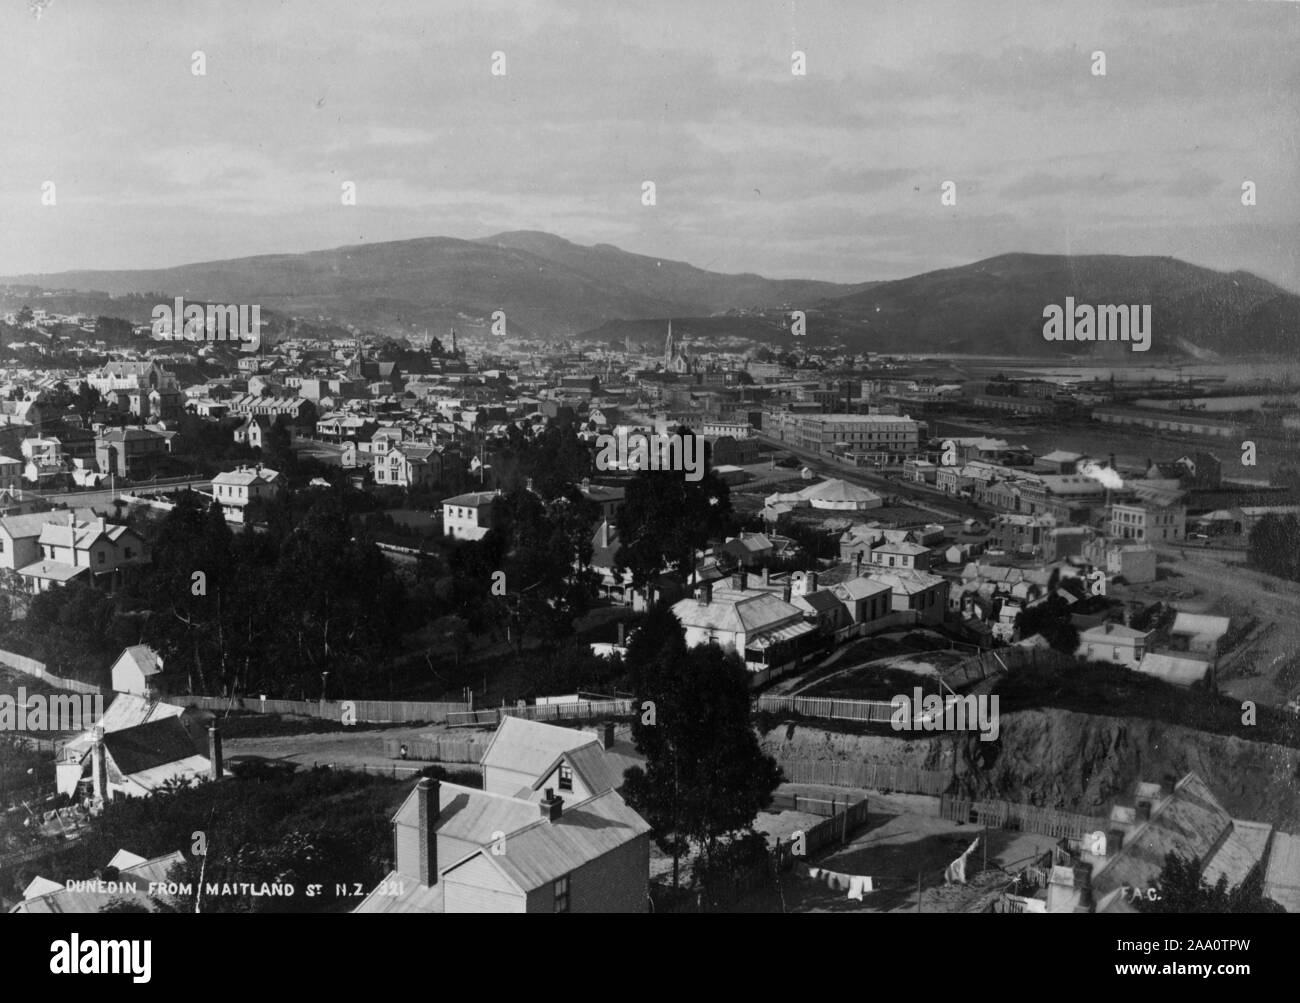 Black and white cityscape photograph of the city of Dunedin with a mountain range in the background, in the South Island, New Zealand, by photographer Frank Coxhead, 1885. From the New York Public Library. () Stock Photo